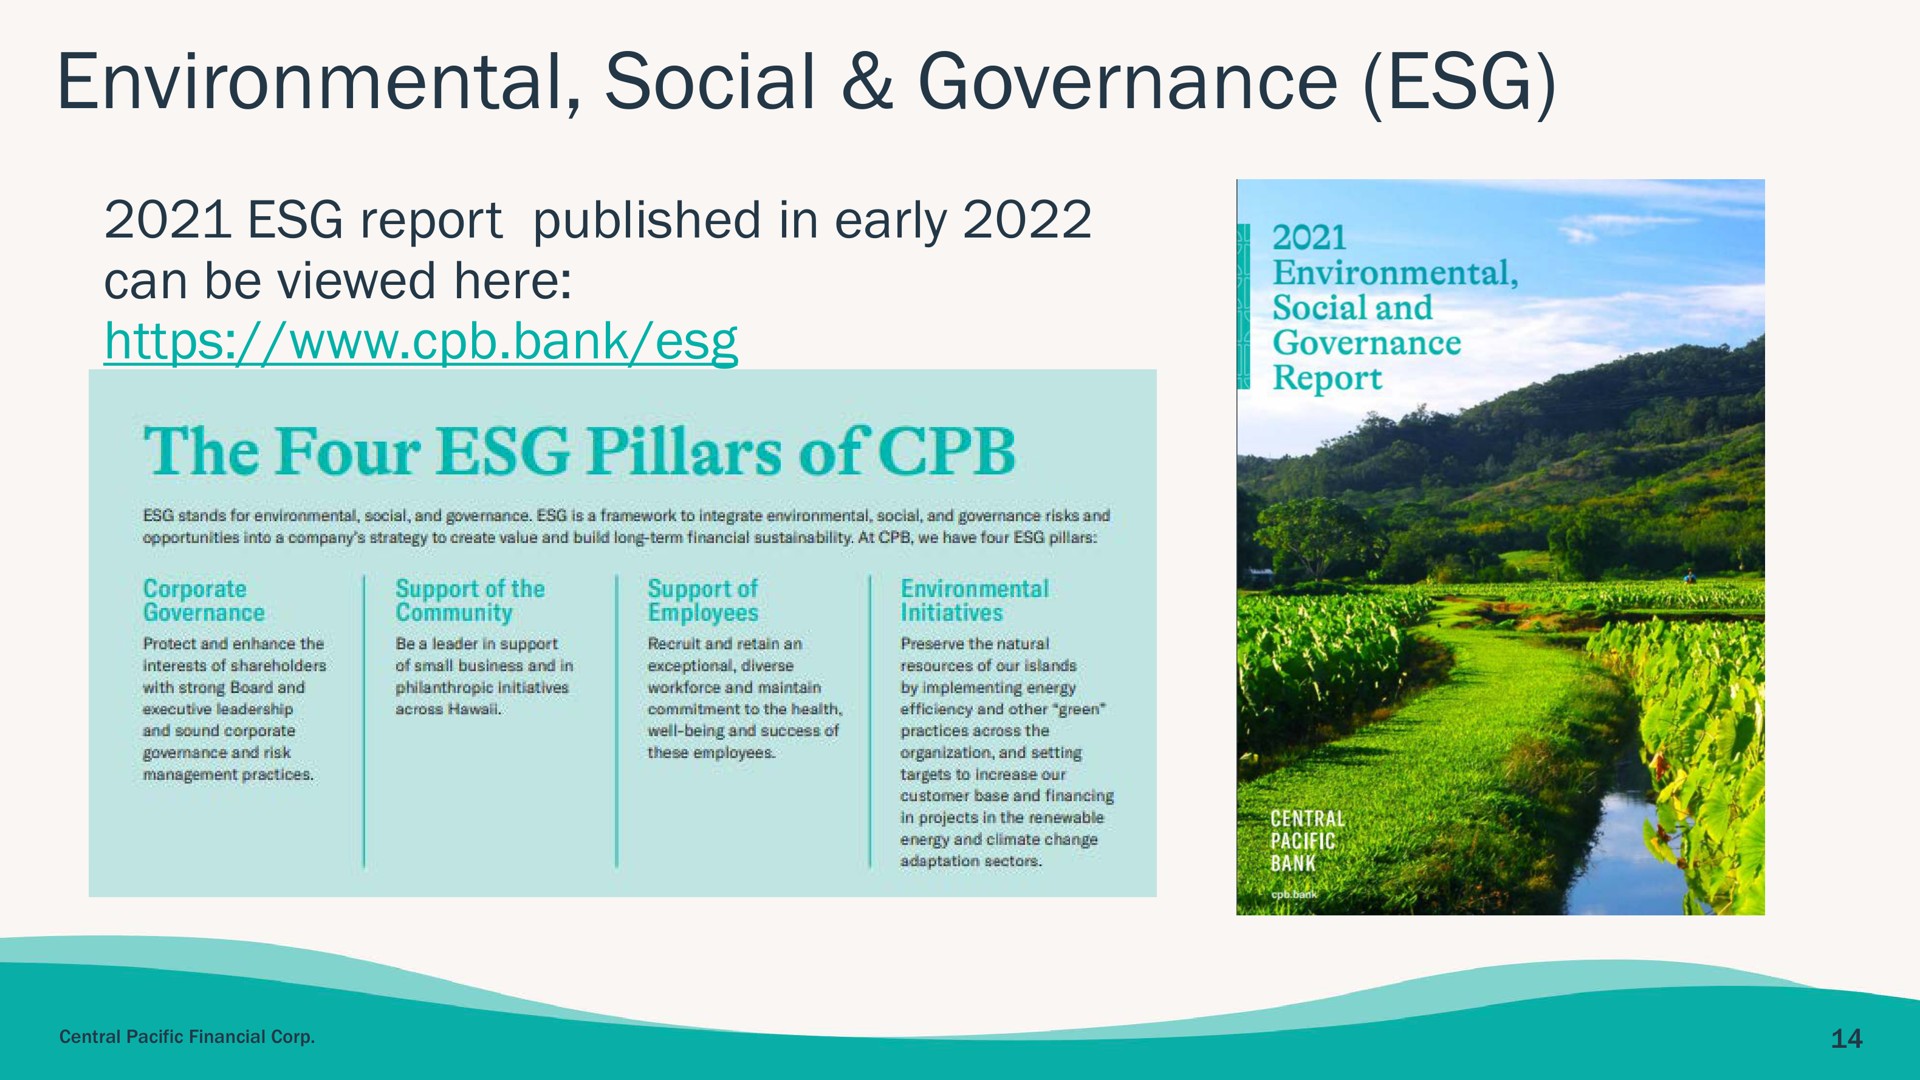 environmental social governance report published in early can be viewed here bank the four pillars of | Central Pacific Financial